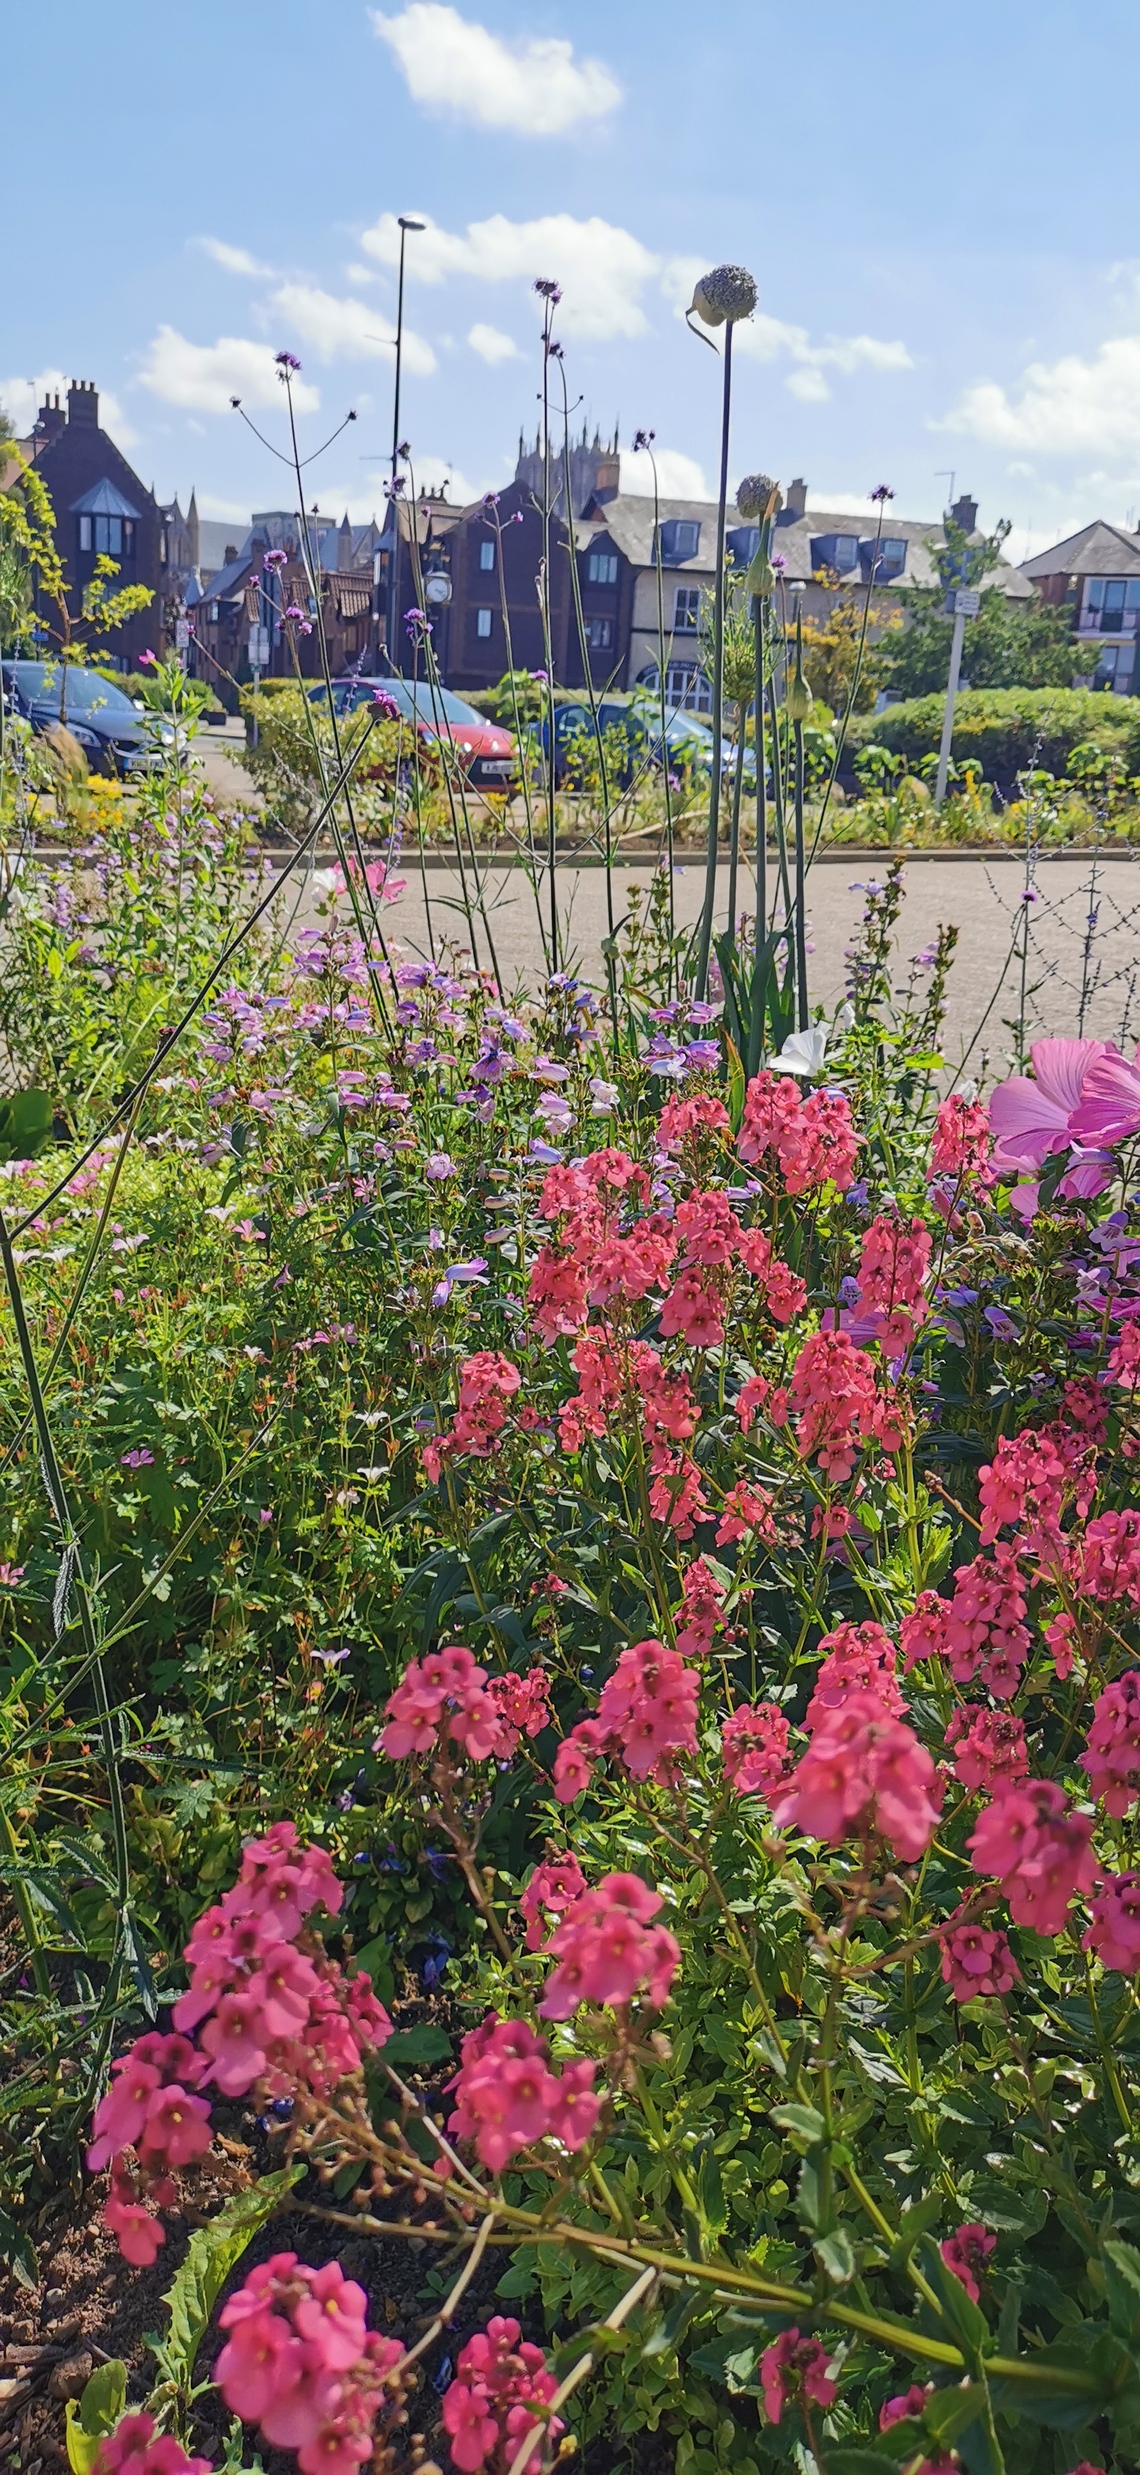 Beverley in Bloom, flowers in the station car park, July 2021